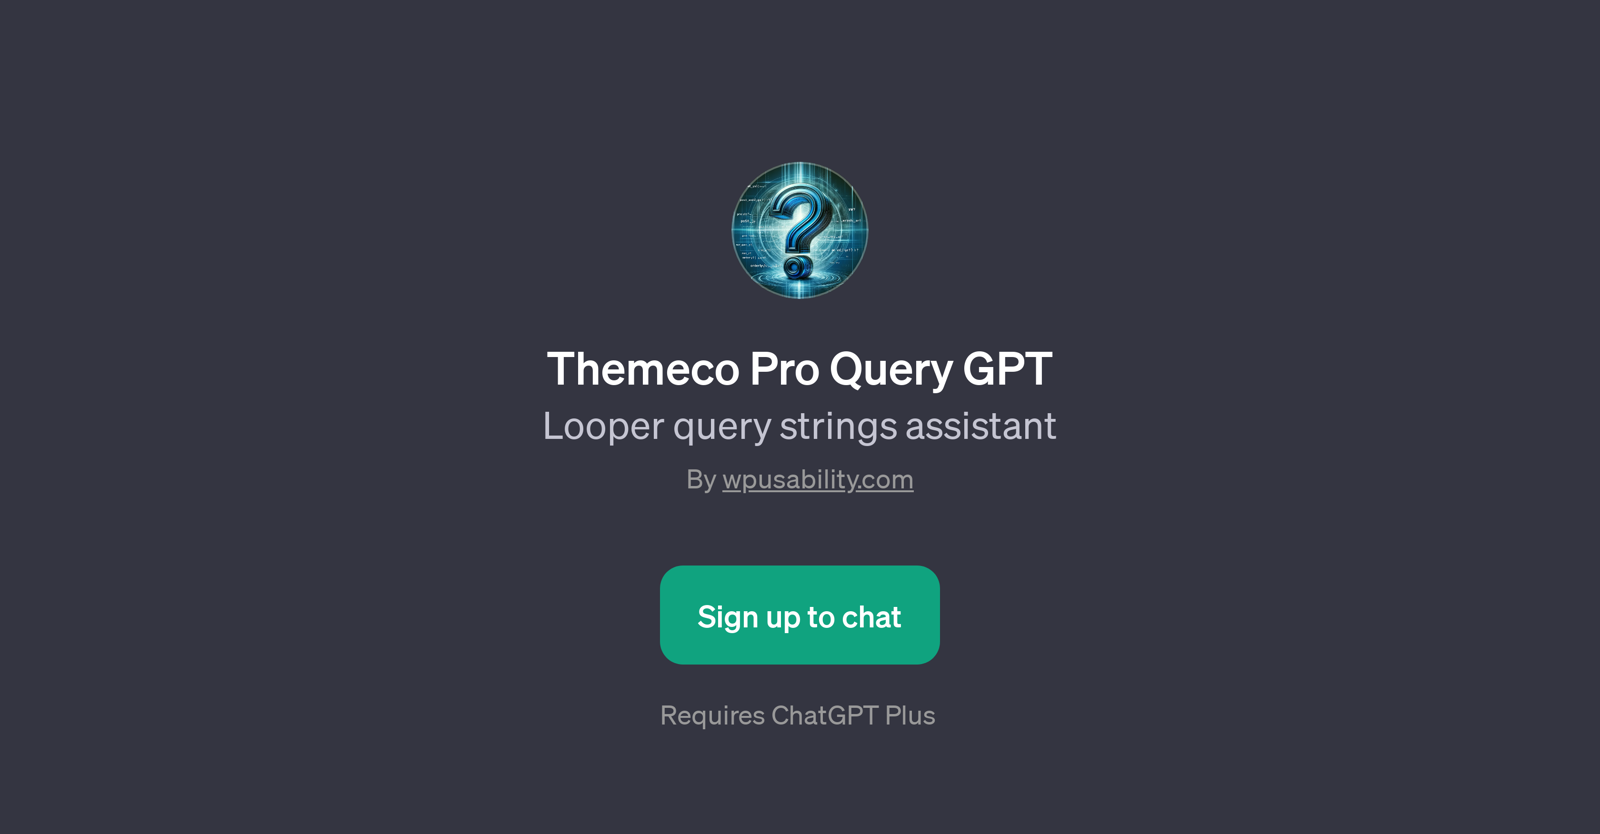 Themeco Pro Query GPT website